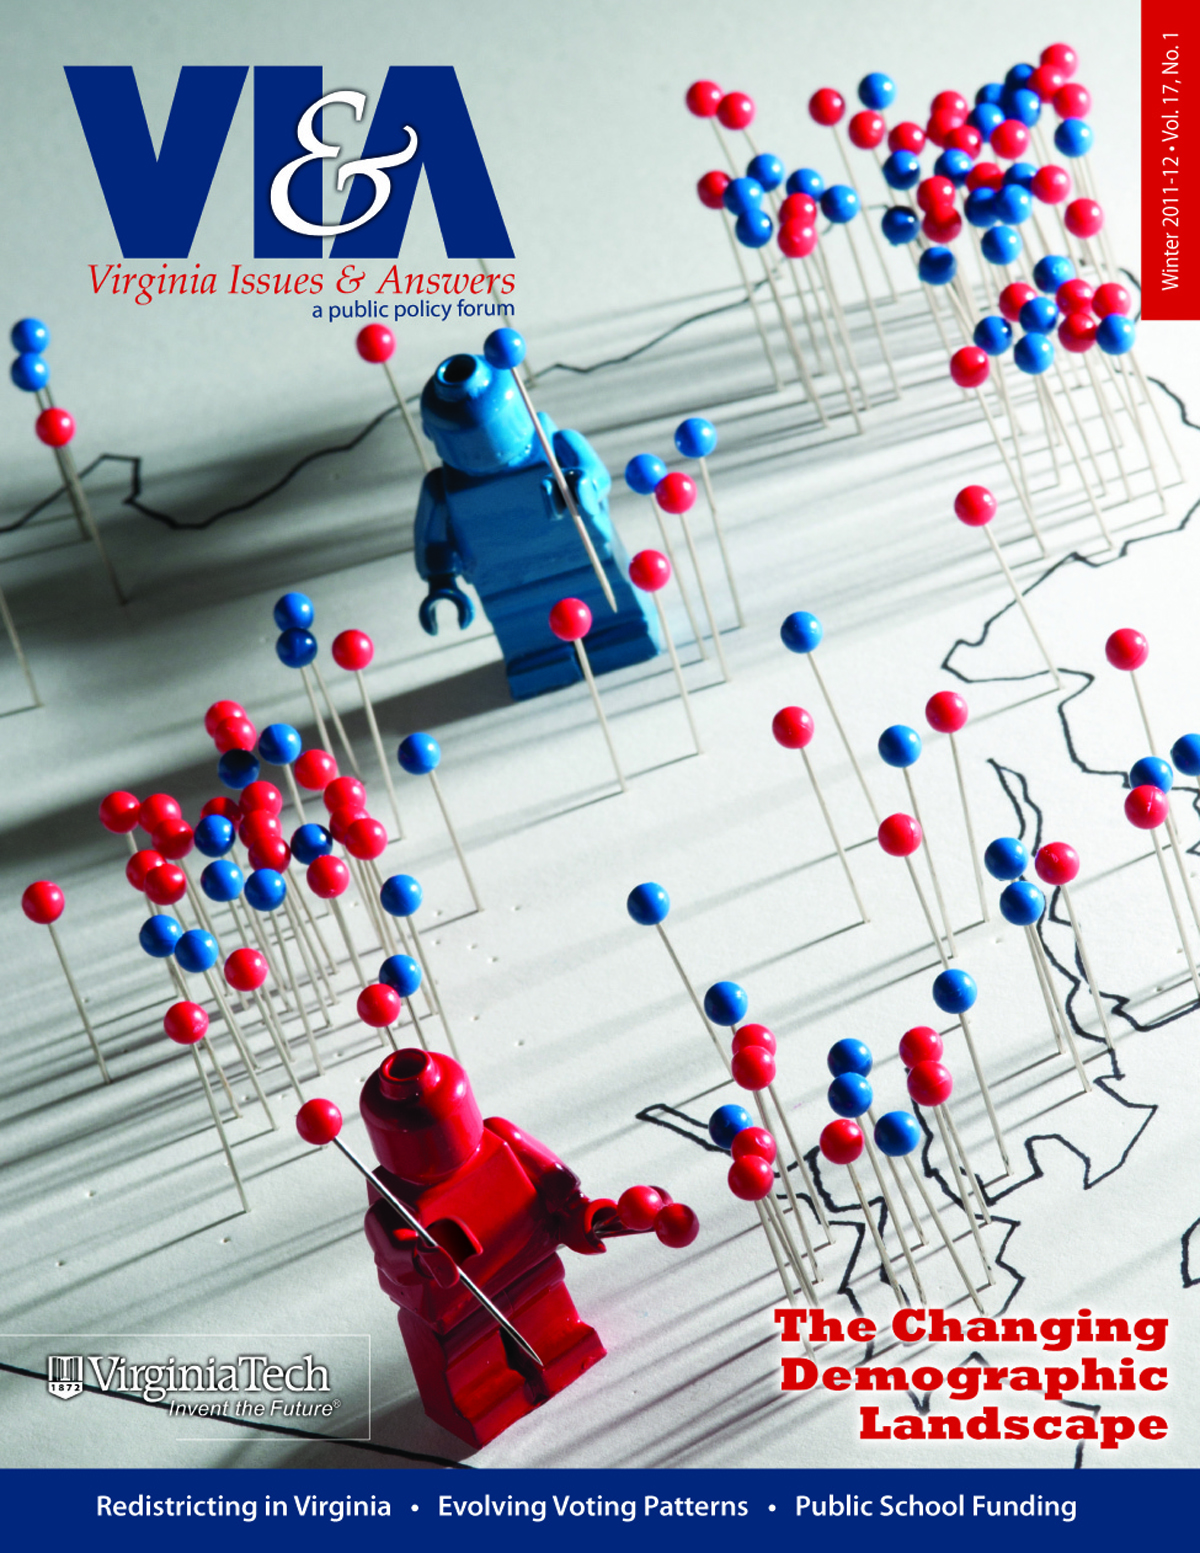 Winter 2011-12 edition of Virginia Issues & Answers